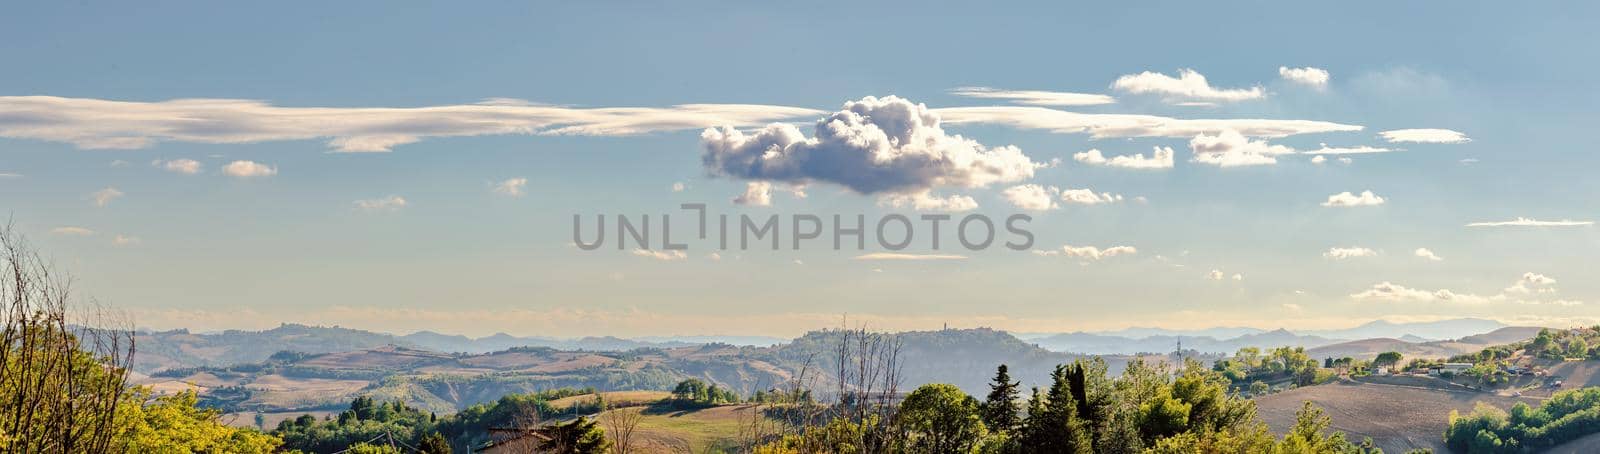 View of the Montefeltro hills and mountains from Belvedere Fogliense in the Marche region of Italy, at evening, under a cloudy sky.